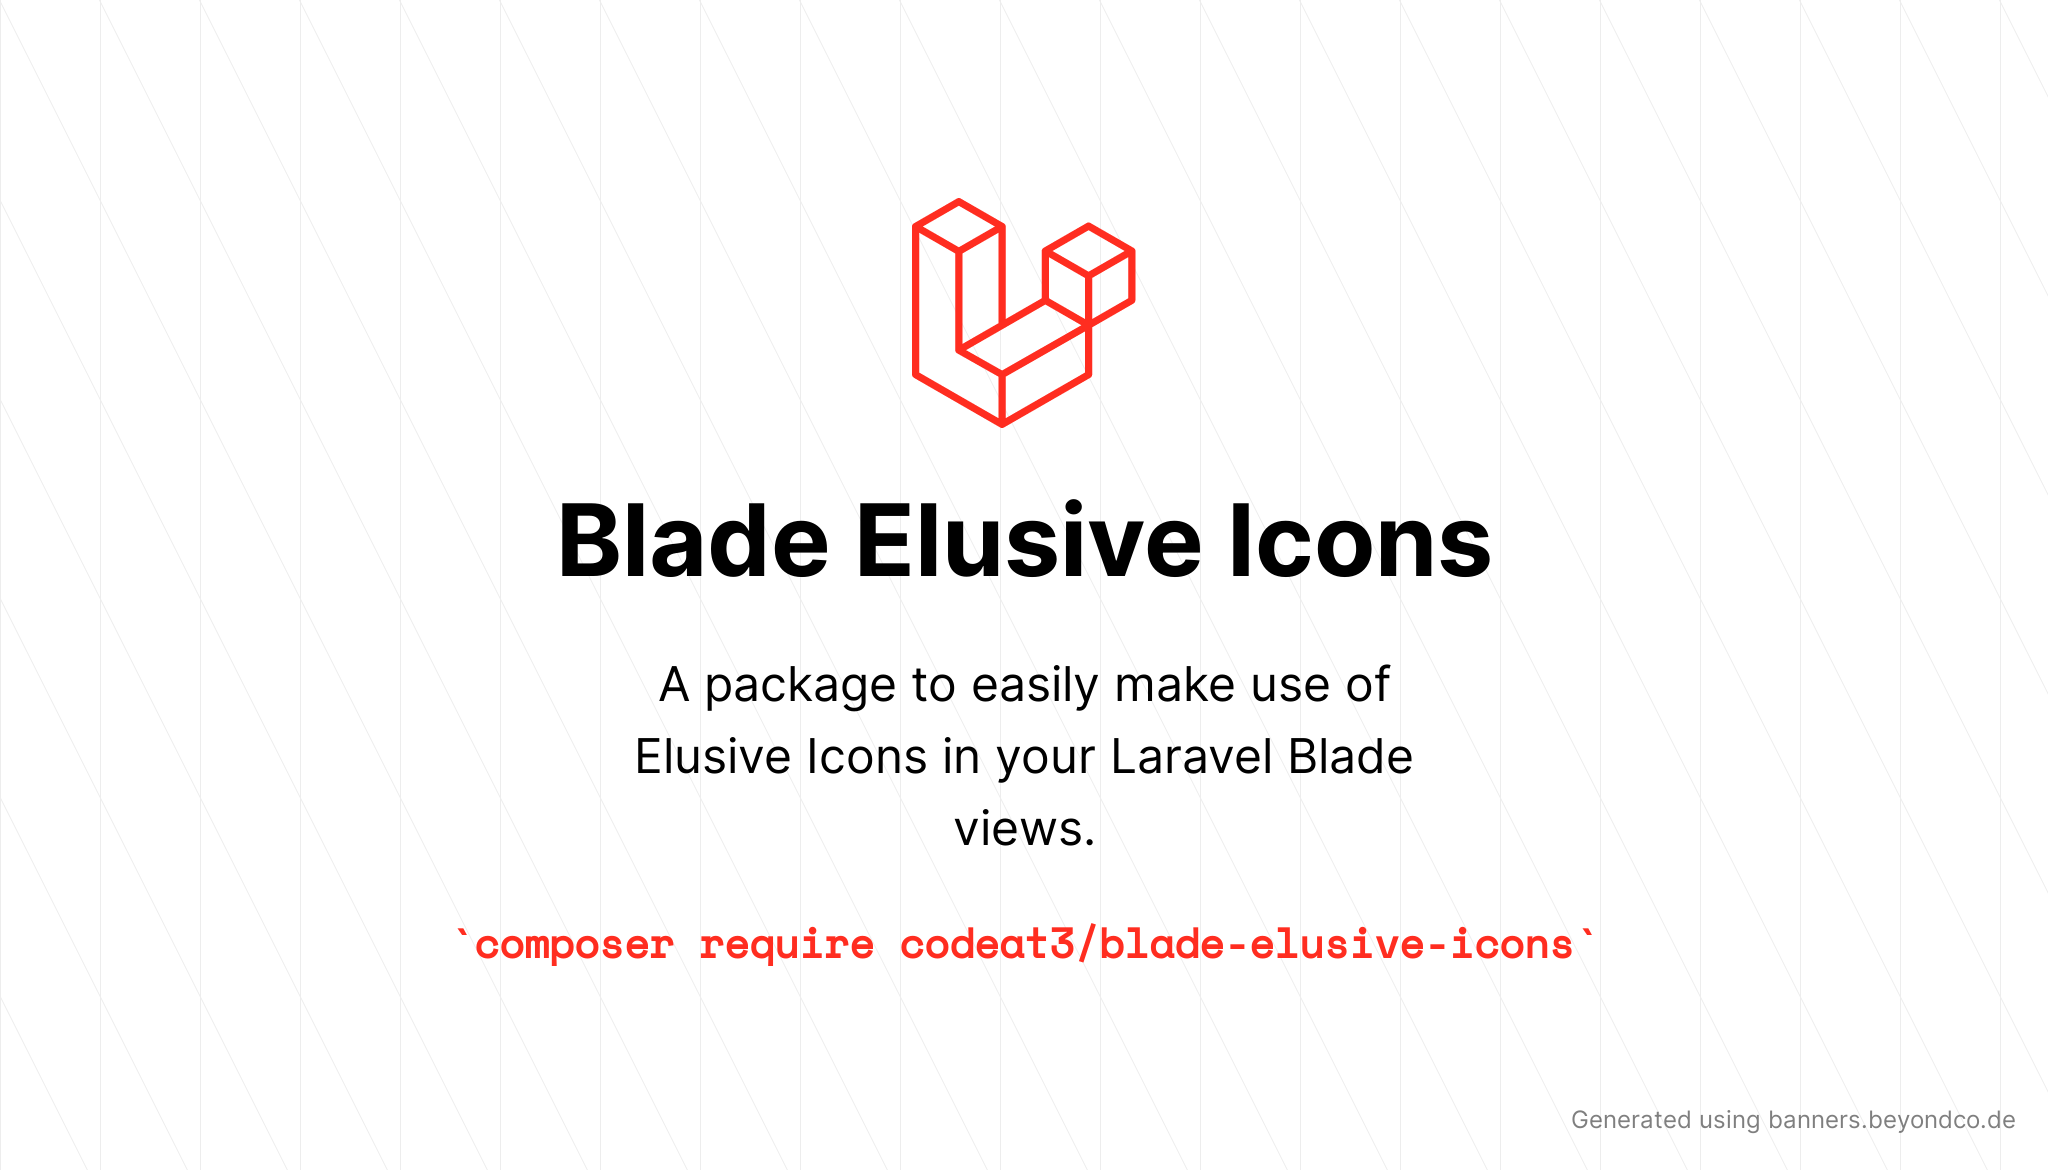 socialcard-blade-elusive-icons.png